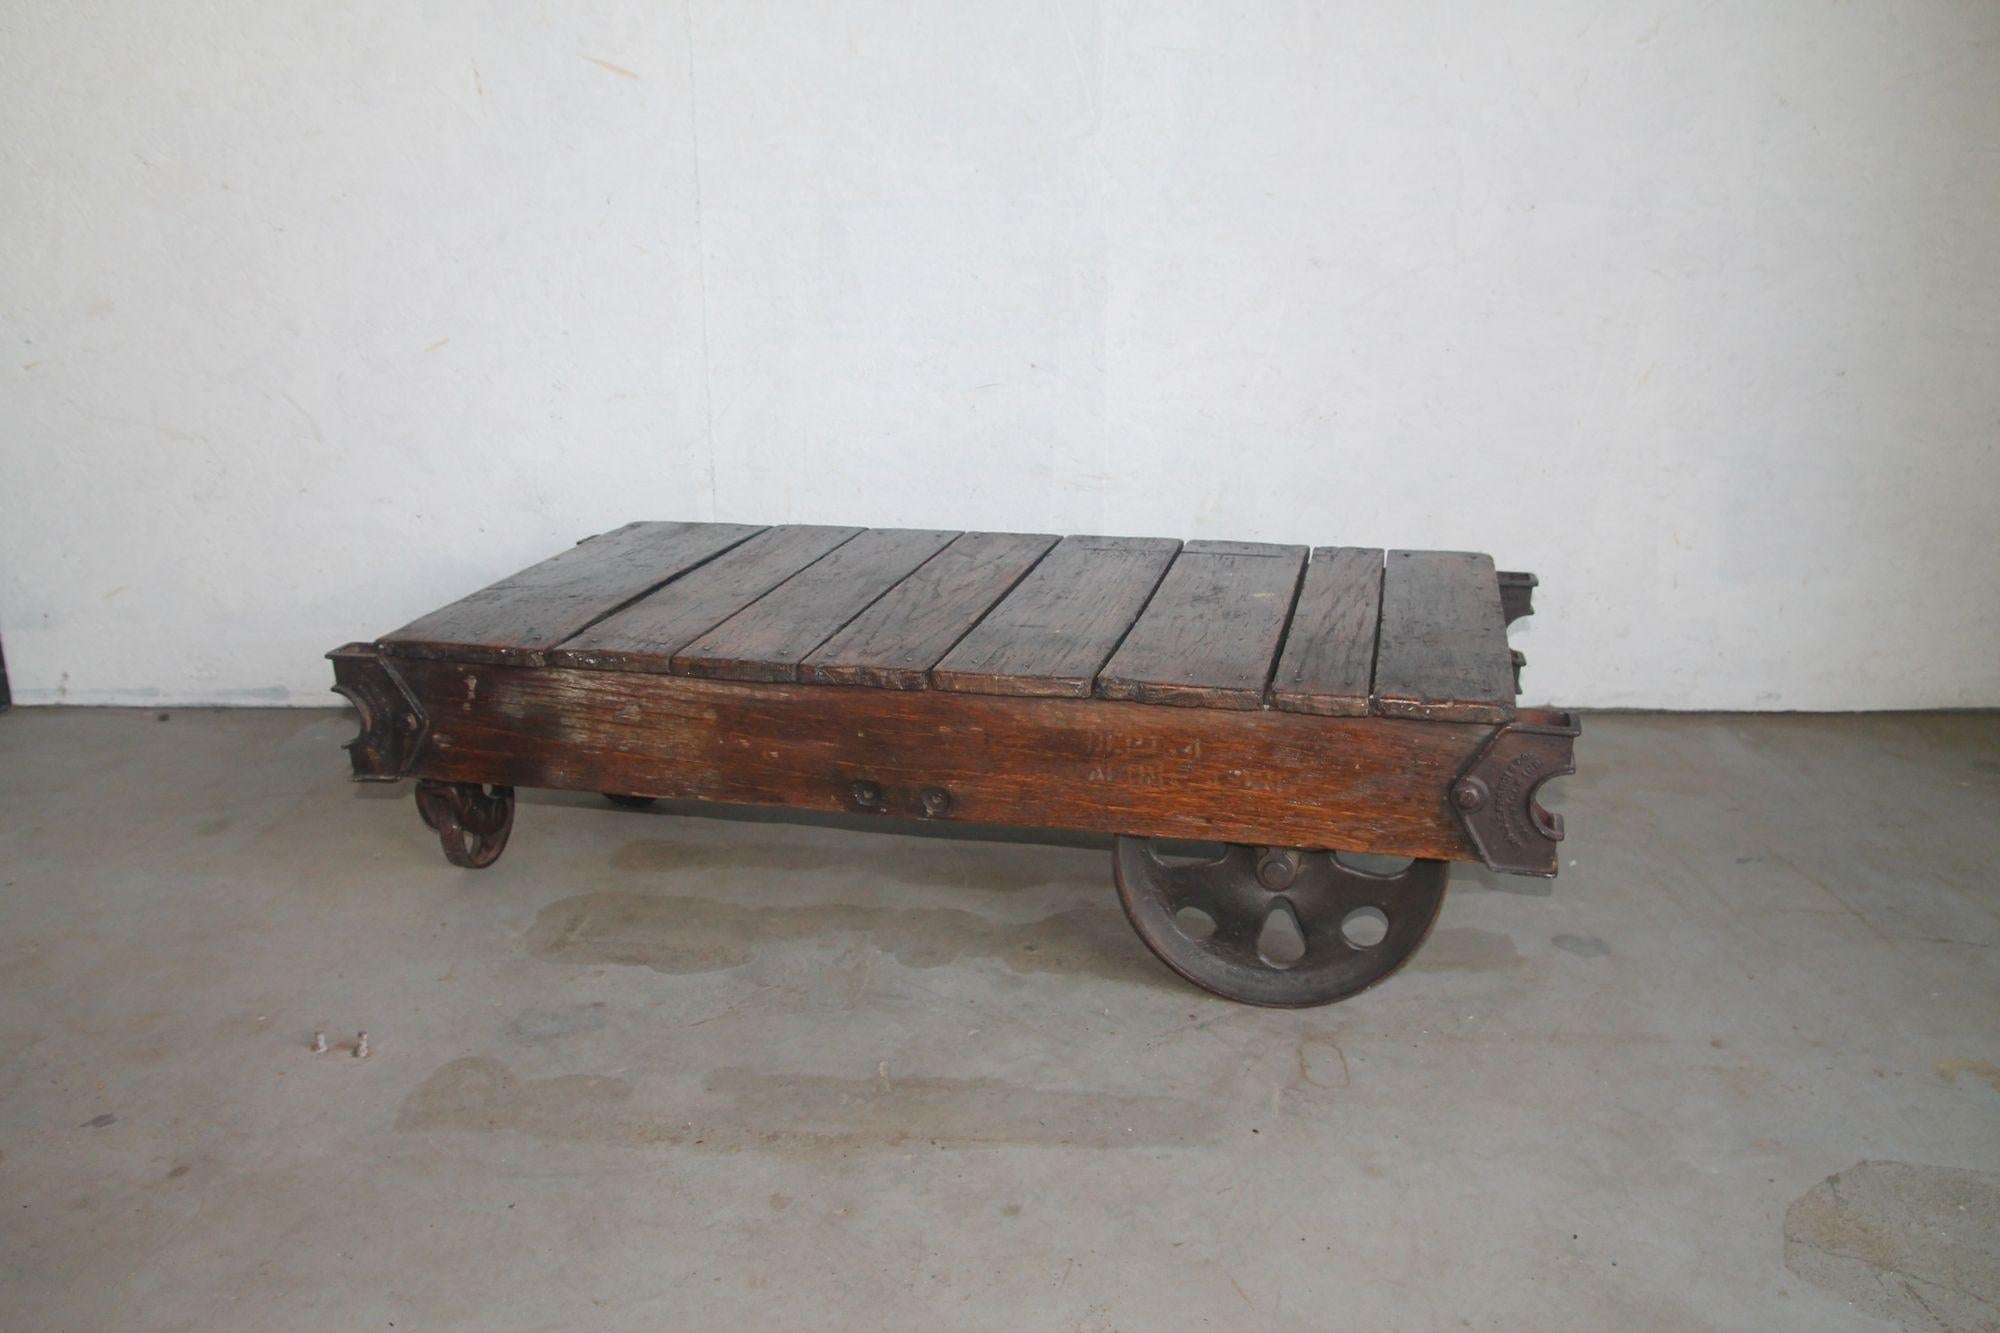 Pleased to offer this great orginal industrial coffee table cart. This amazing cart has 4 iron wheels. This will look great in any decor. This was just removed from a NYC loft.